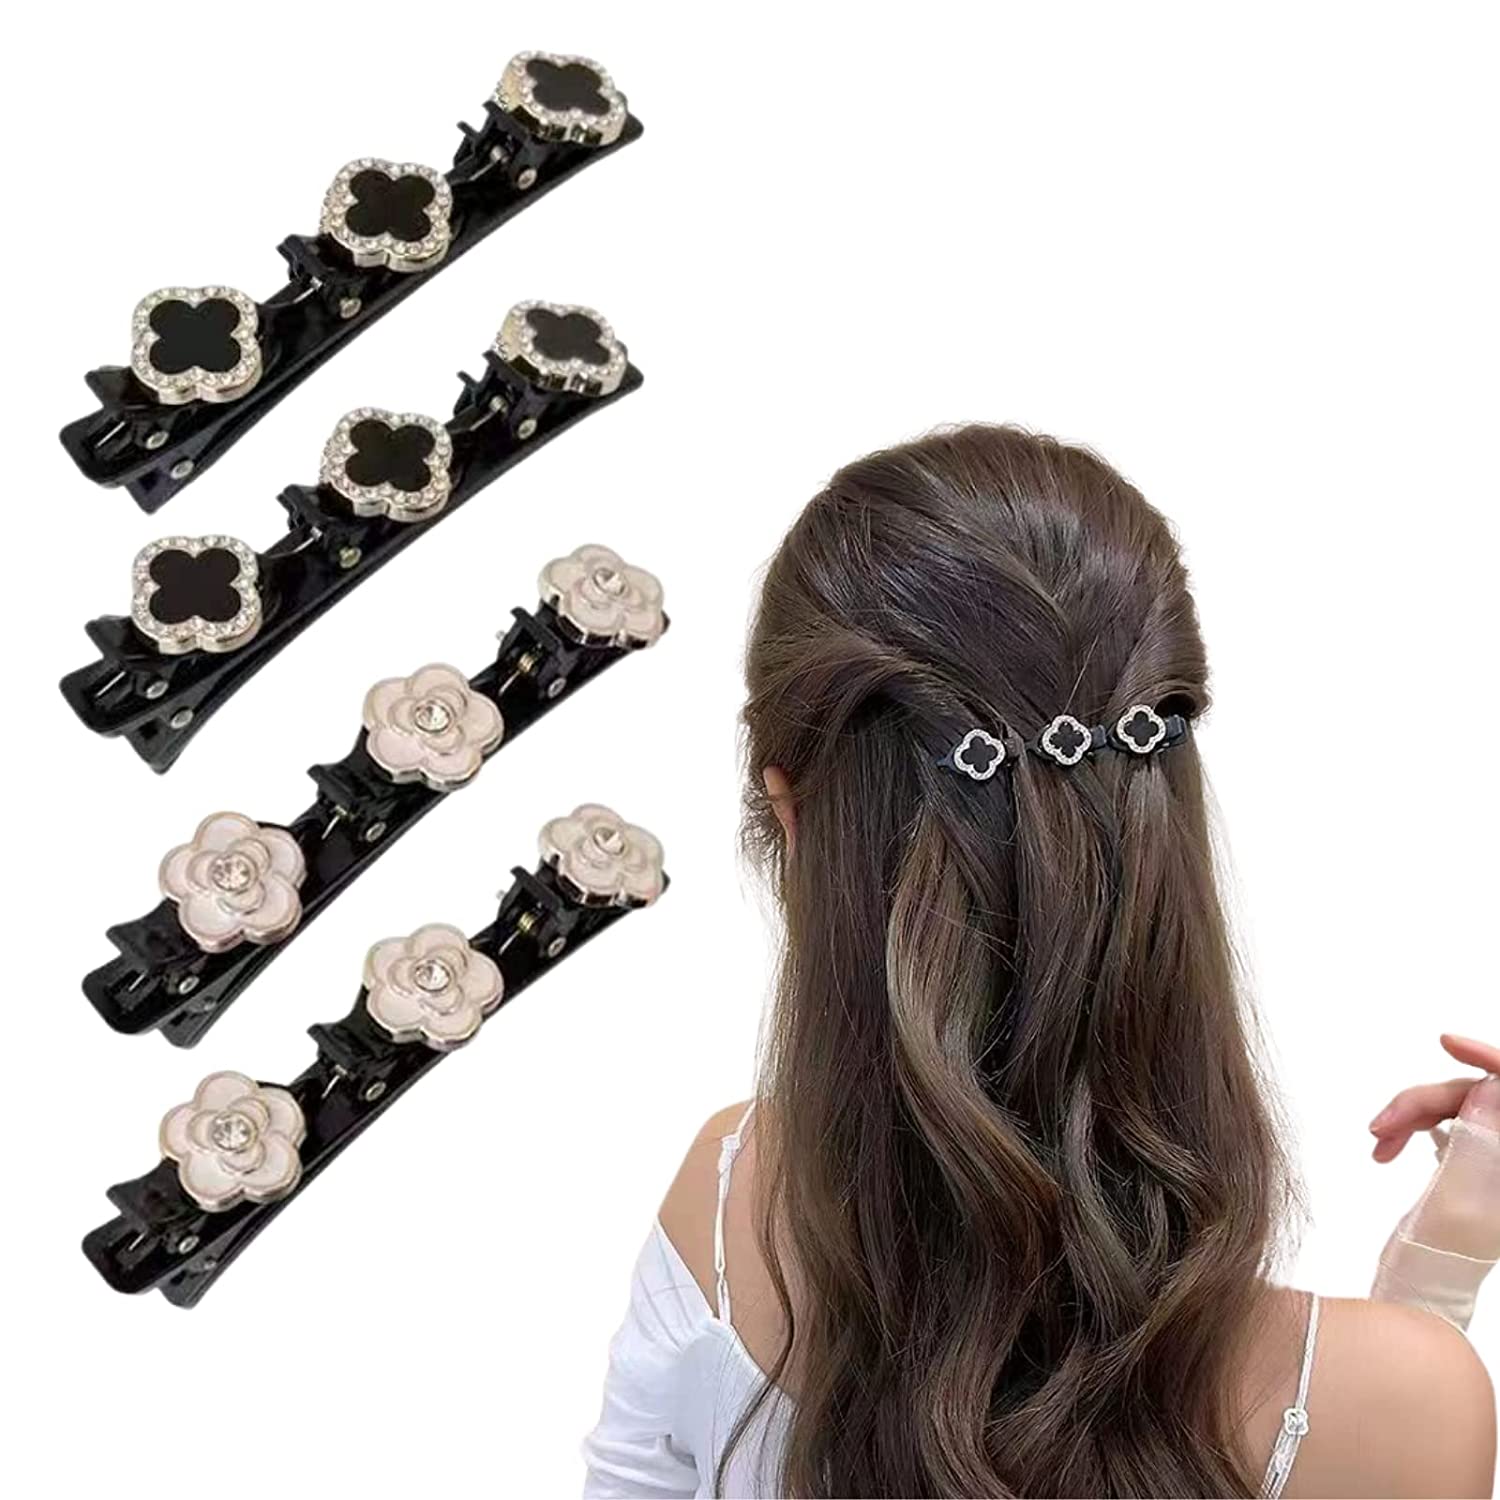 Menkey 4pcs Braided Hair Clips, Braided Hair Clip with 4 Small ClipsBlack Four-Leaf Clover, Pearl, Camellia Flower, Butterfly Pattern, Multi